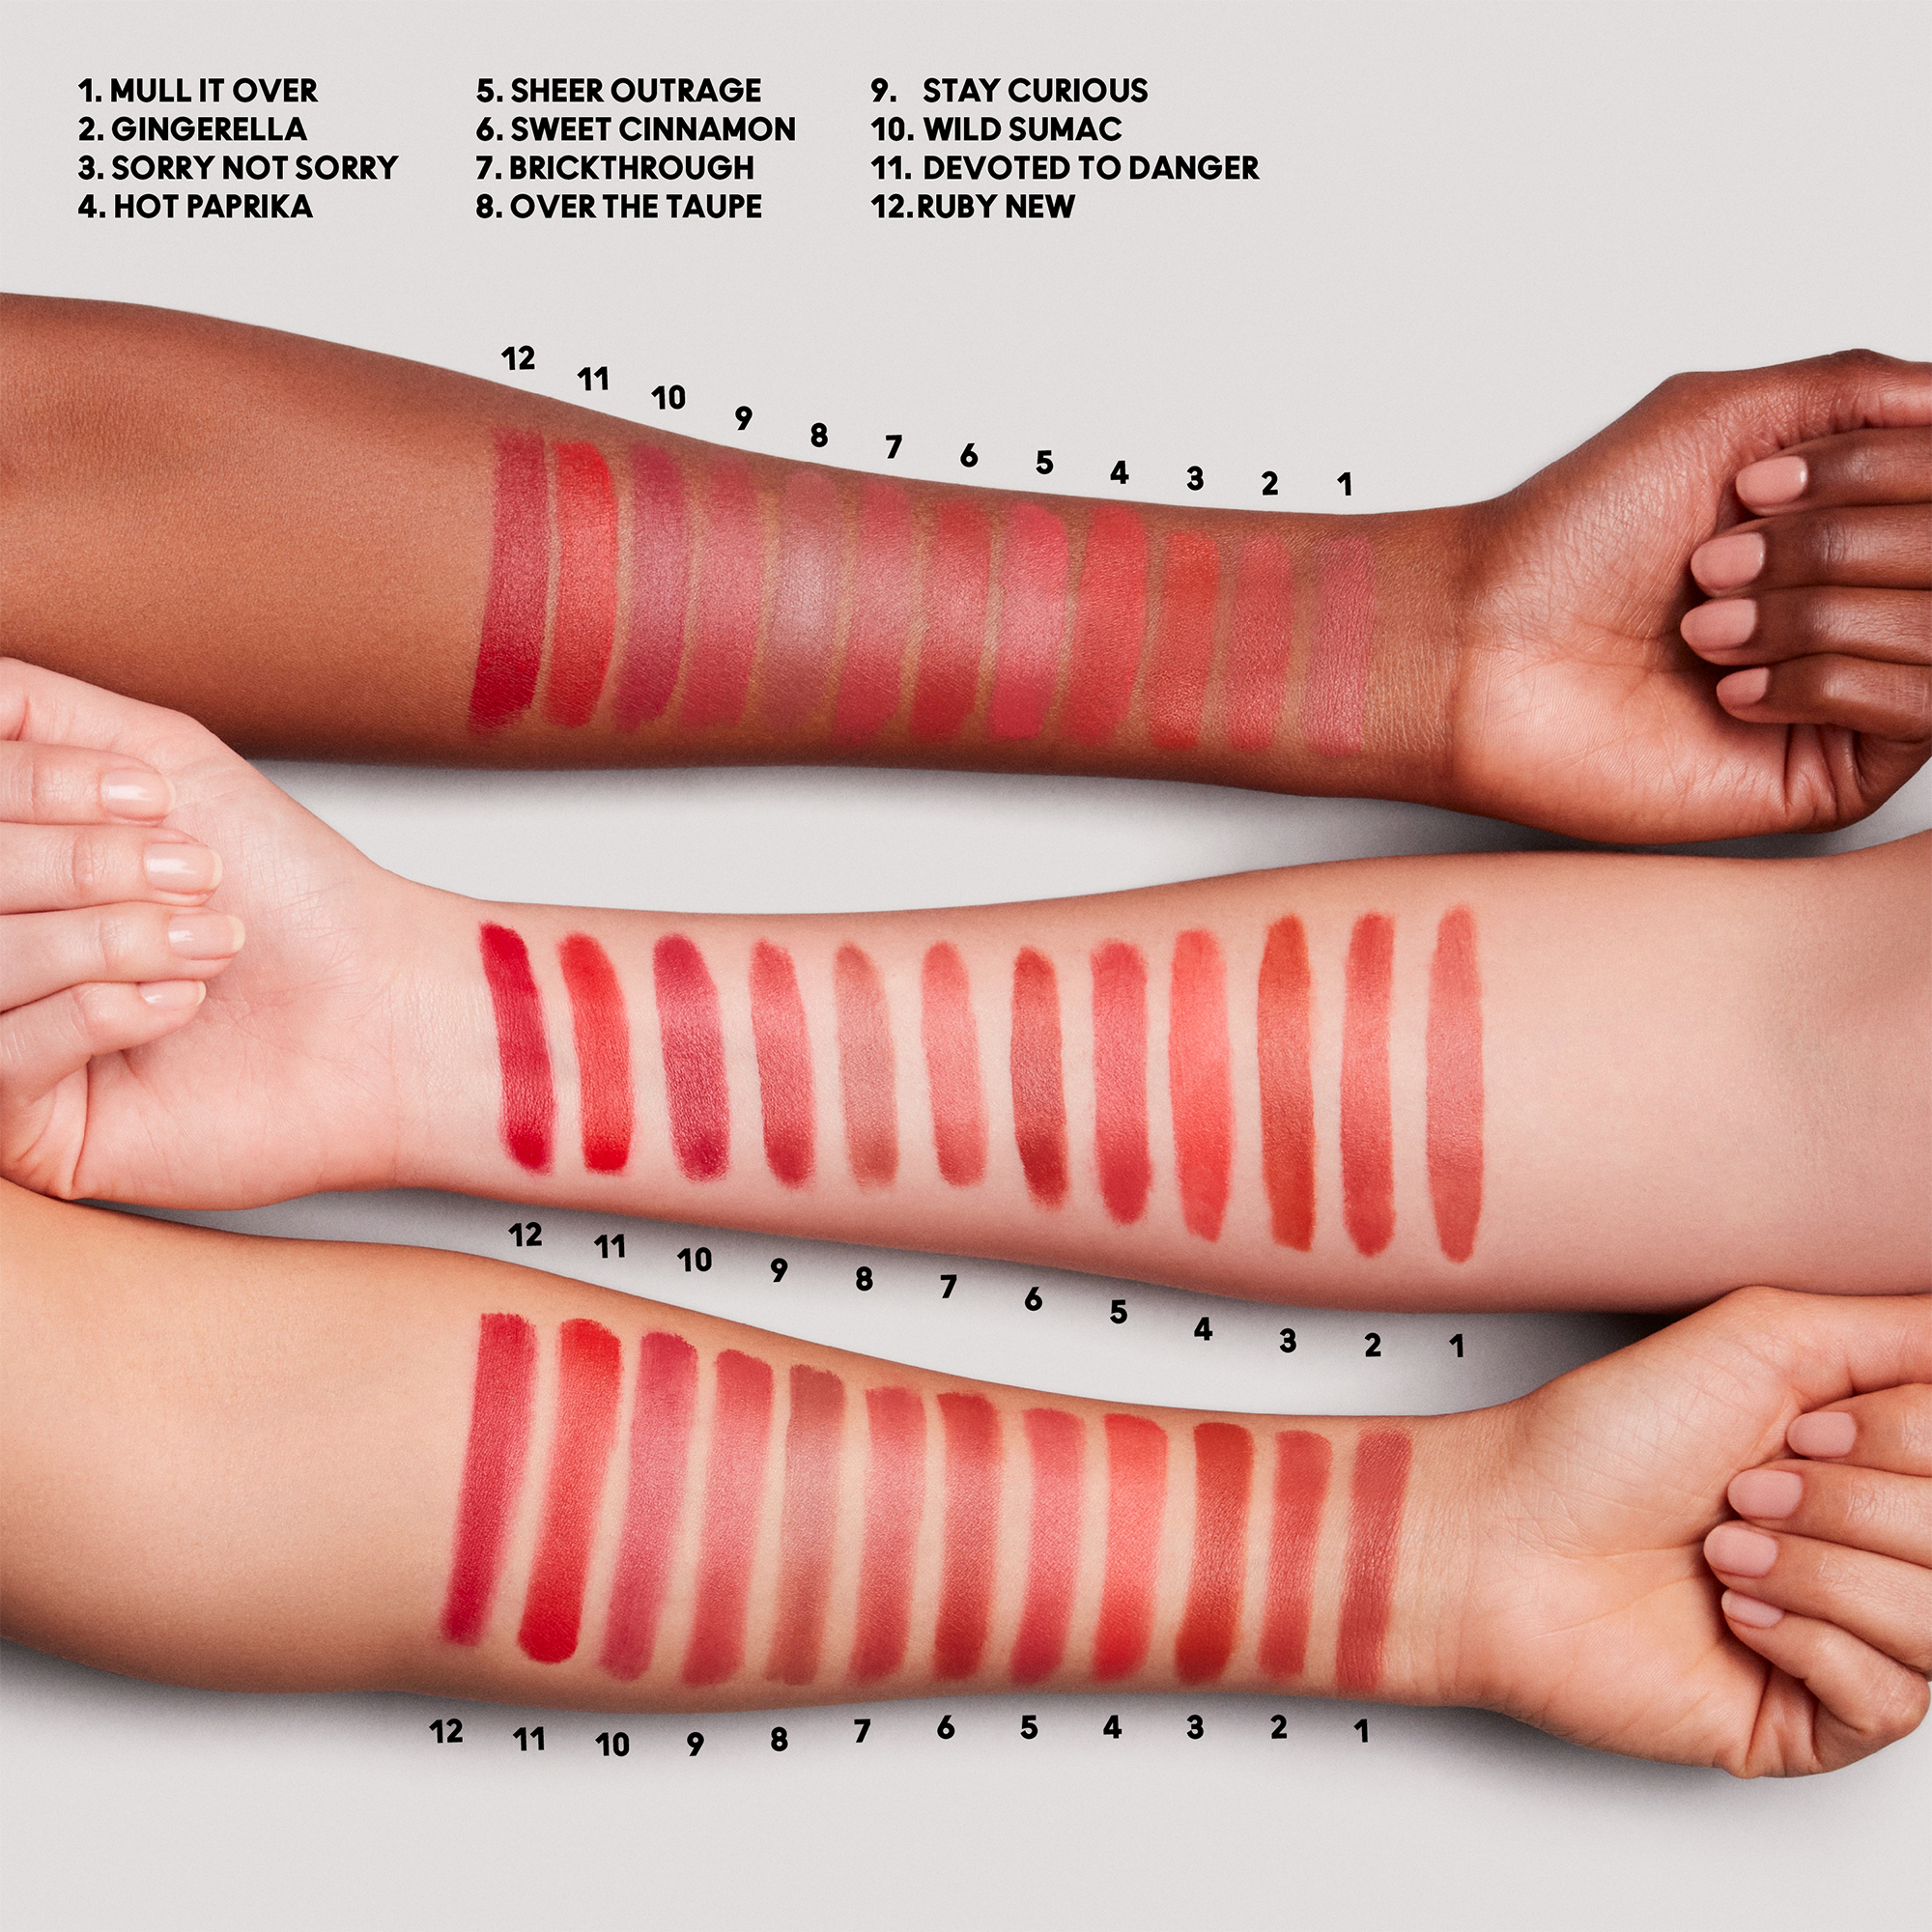 Image shows the different product shades across three different skin tones. Text, mull it over, gingerella, sorry not sorry, hto paprika, sheer outrage, sweet cinnamon, brickthrough, over the taupe, stay curious, wild sumac, devoted to danger, ruby new